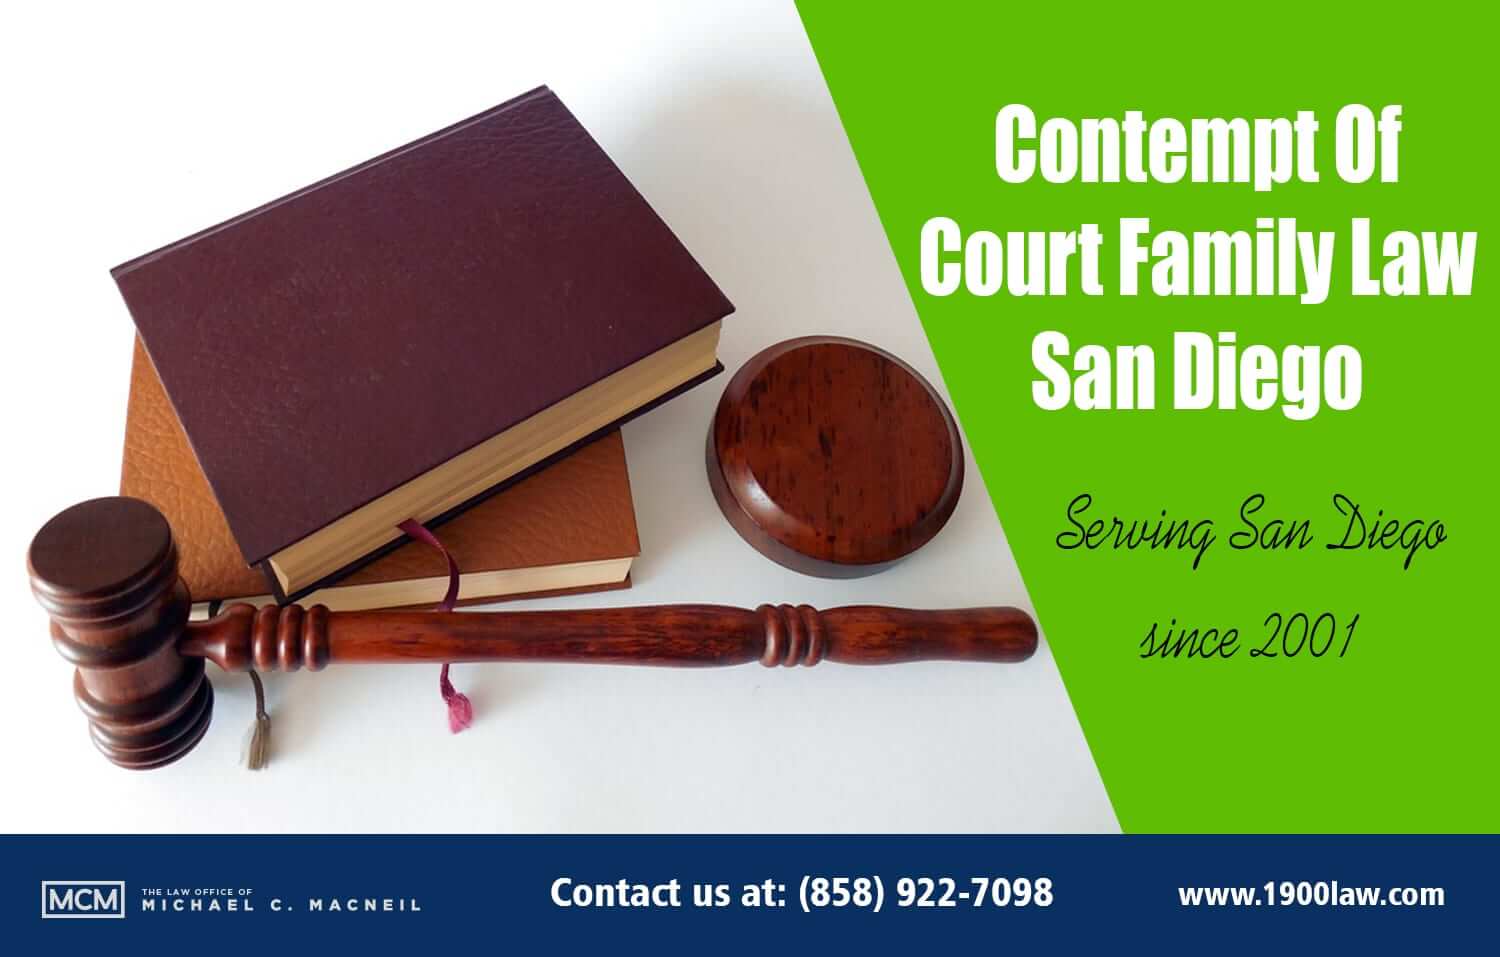 Contempt Of Court Family Law San Diego